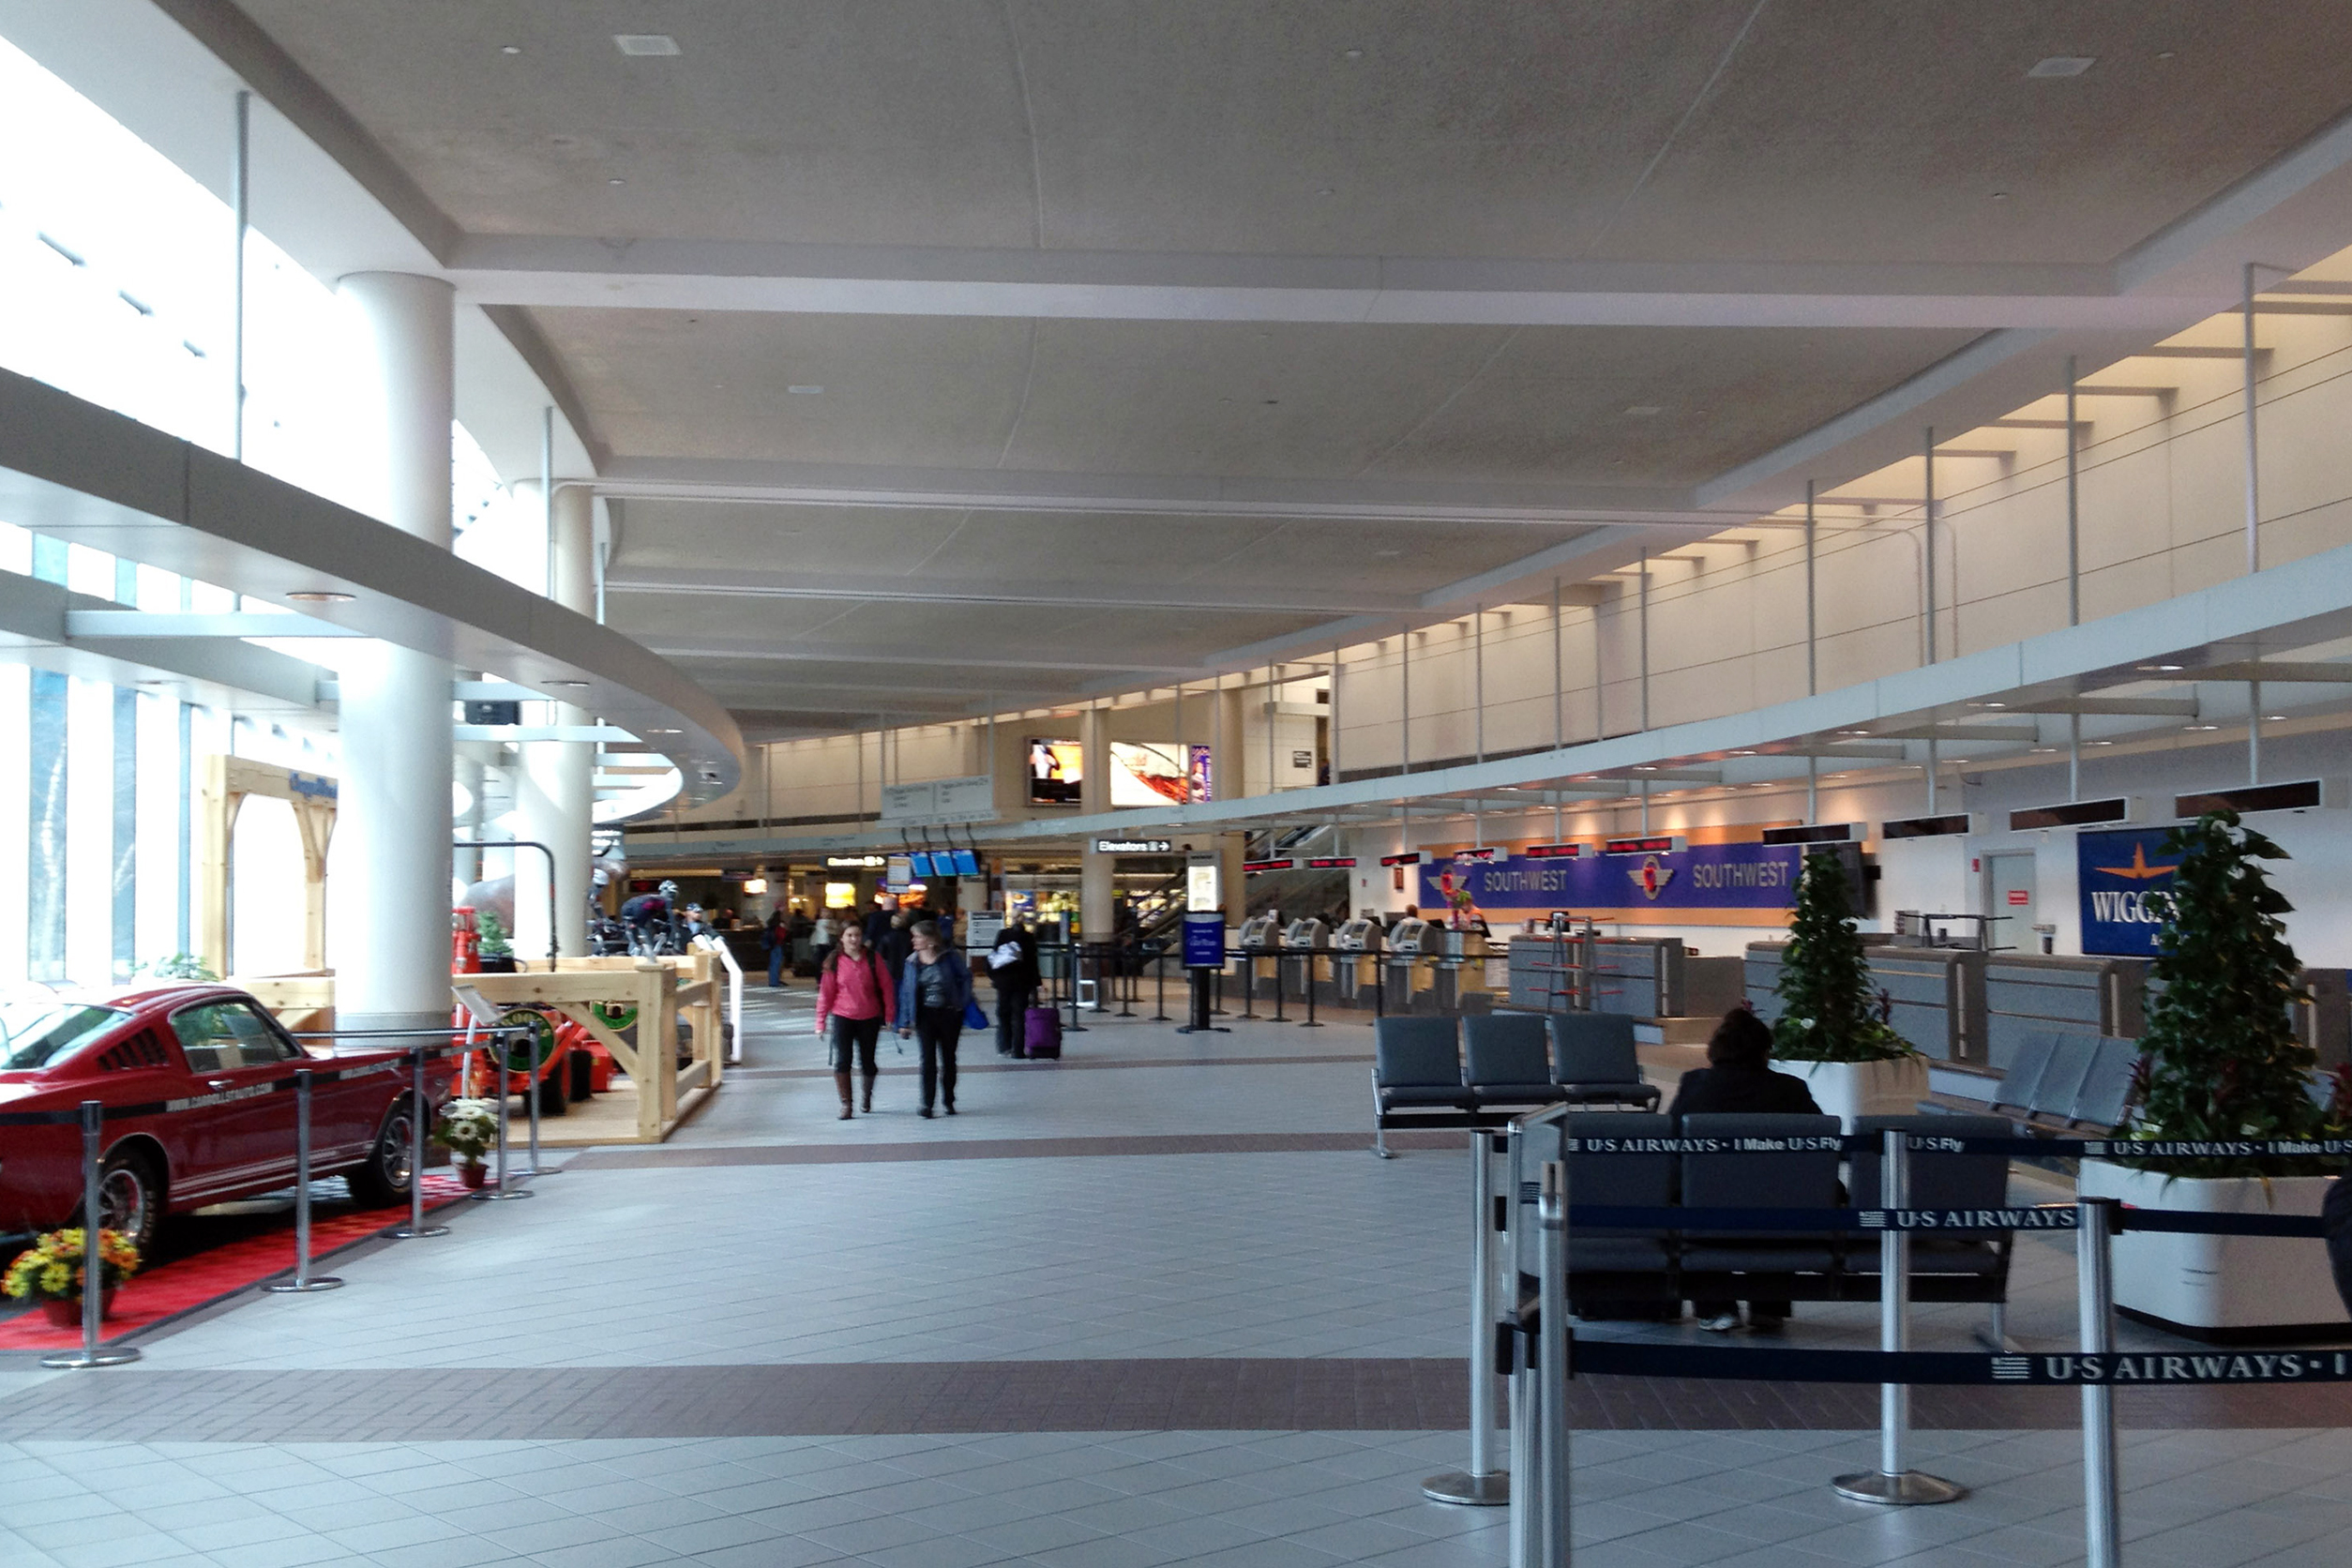 Departure terminal of Manchester-Boston Regional Airport, March 31, 2013